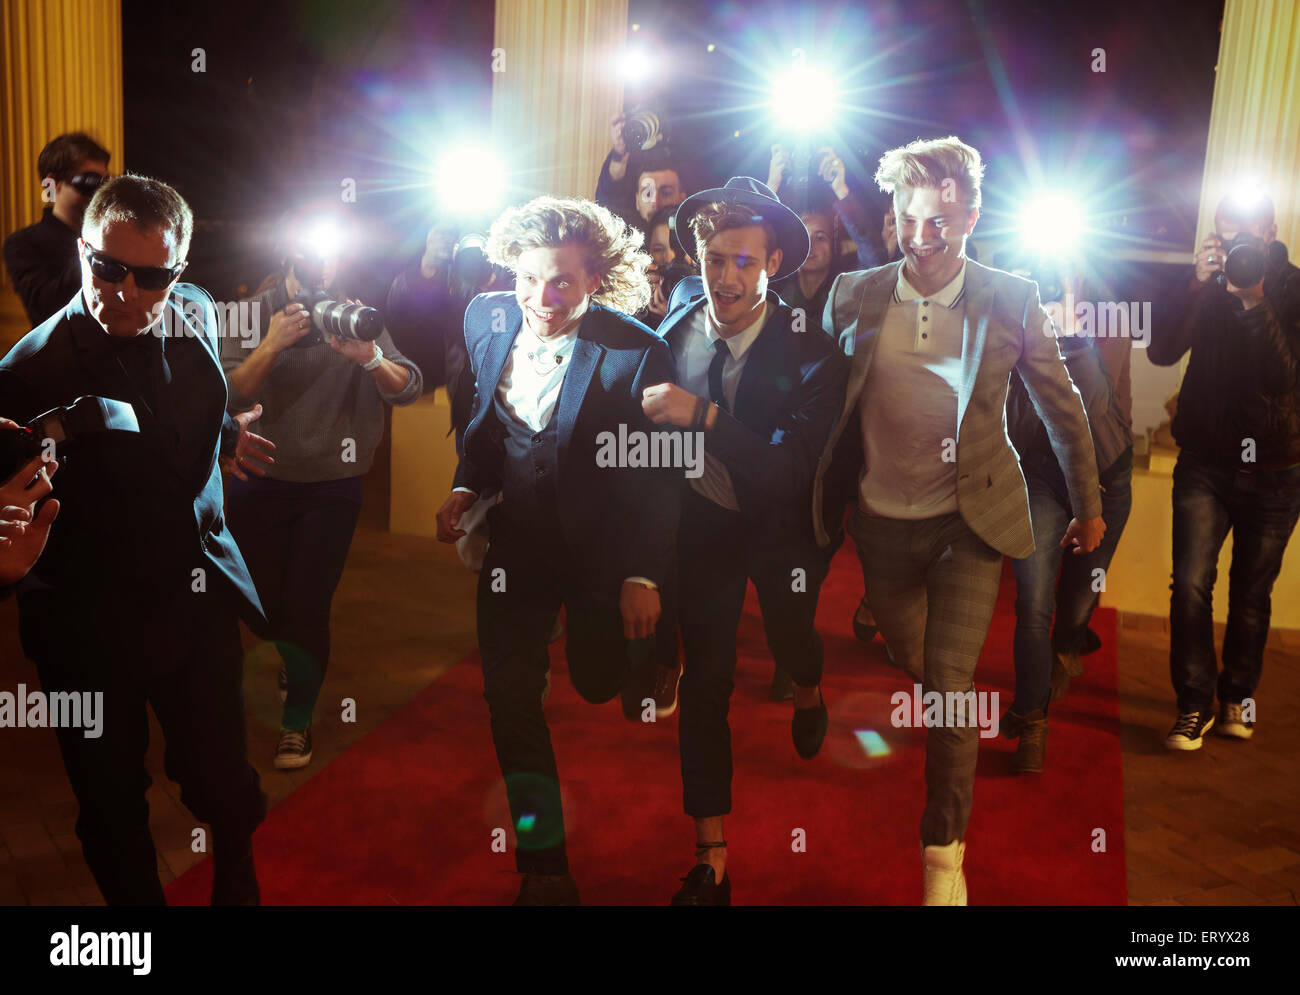 Celebrities running from paparazzi photographers at red carpet event Stock Photo